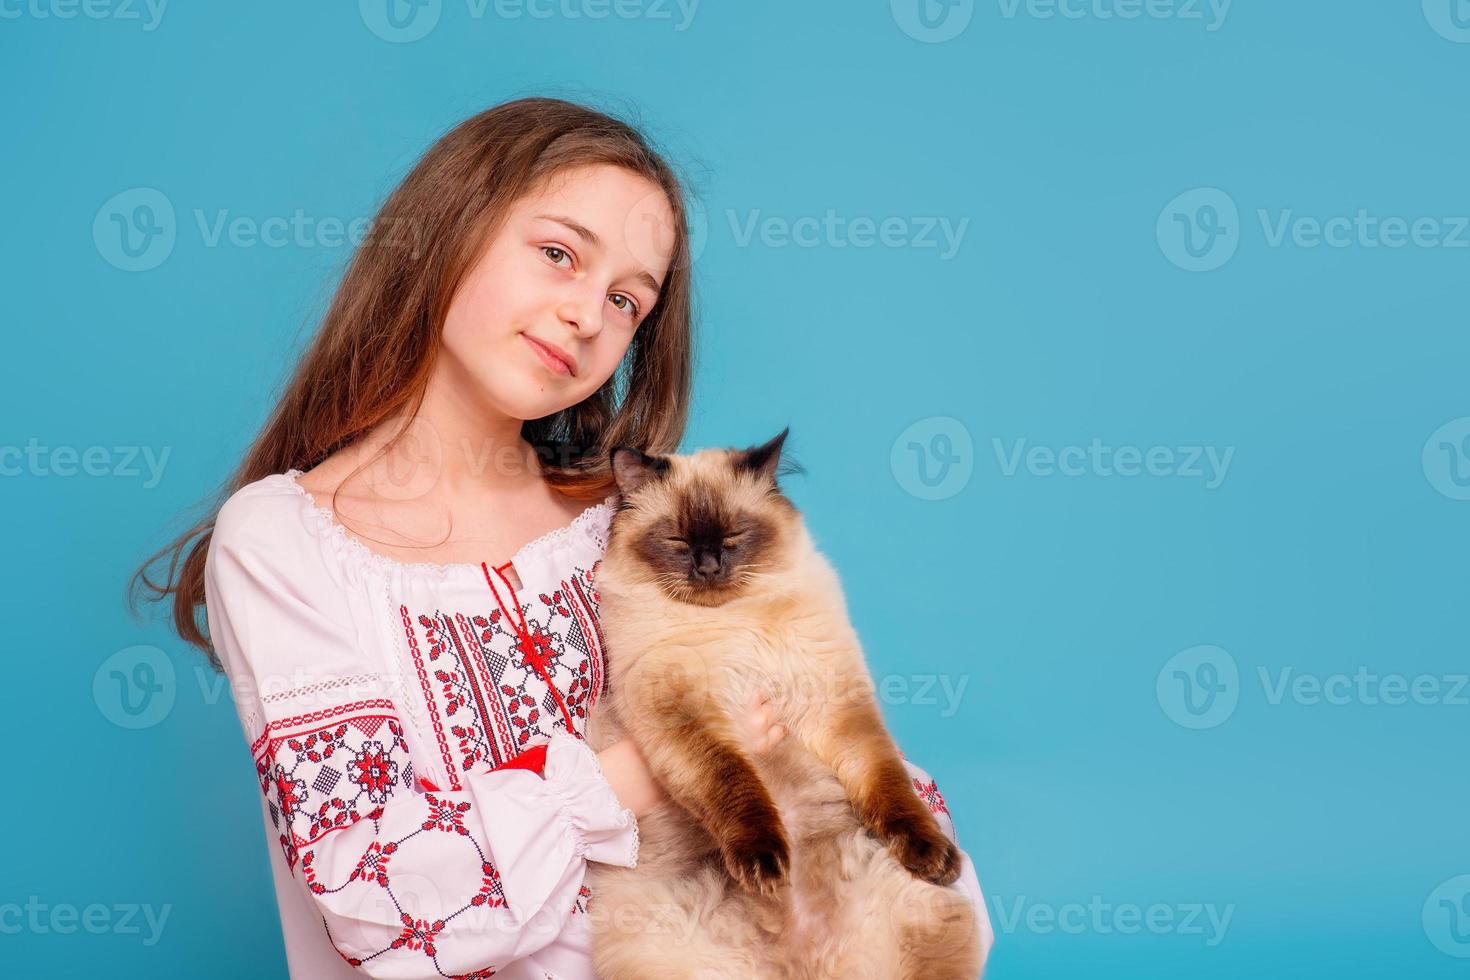 Teen girl with a cat Neva masquerade in her arms. Girl in the embroidered shirt on a blue background photo